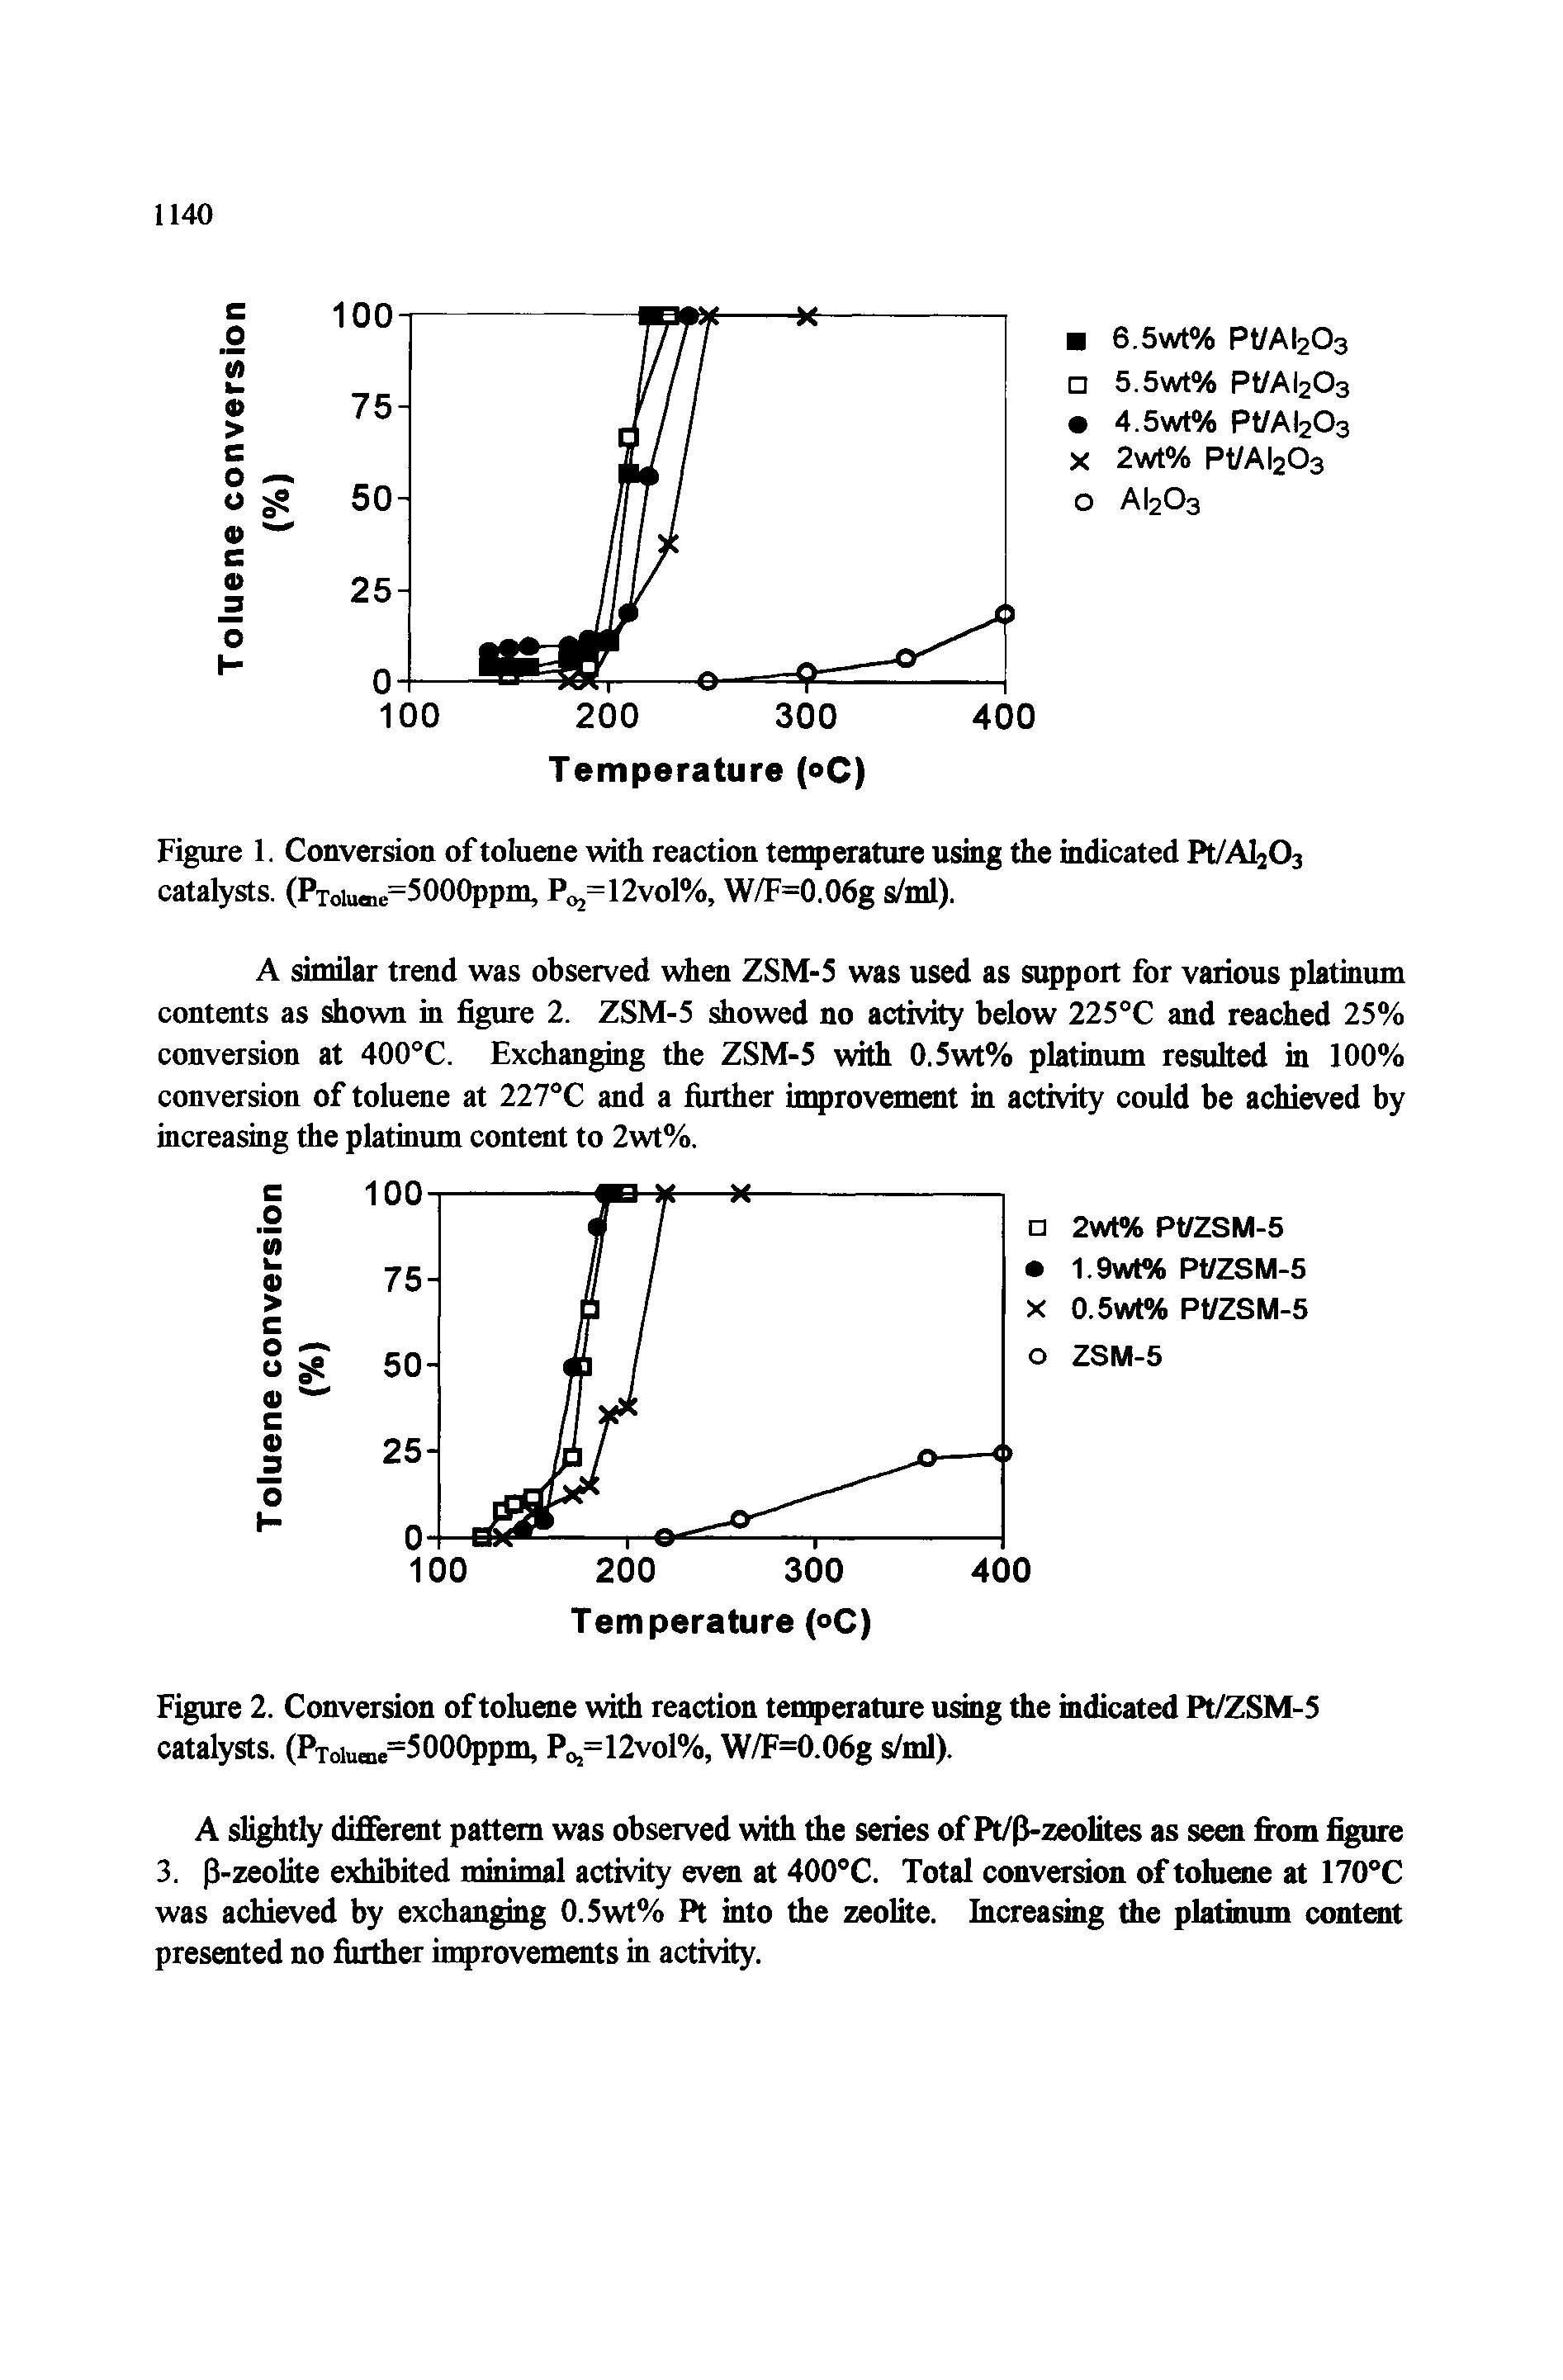 Figure 2. Conversion of toluene with reaction temperature using the indicated Pt/ZSM-5 catalysts. (Pt i.—=5000ppm. Po,=12vol%, W/F=0.06g s/ml).